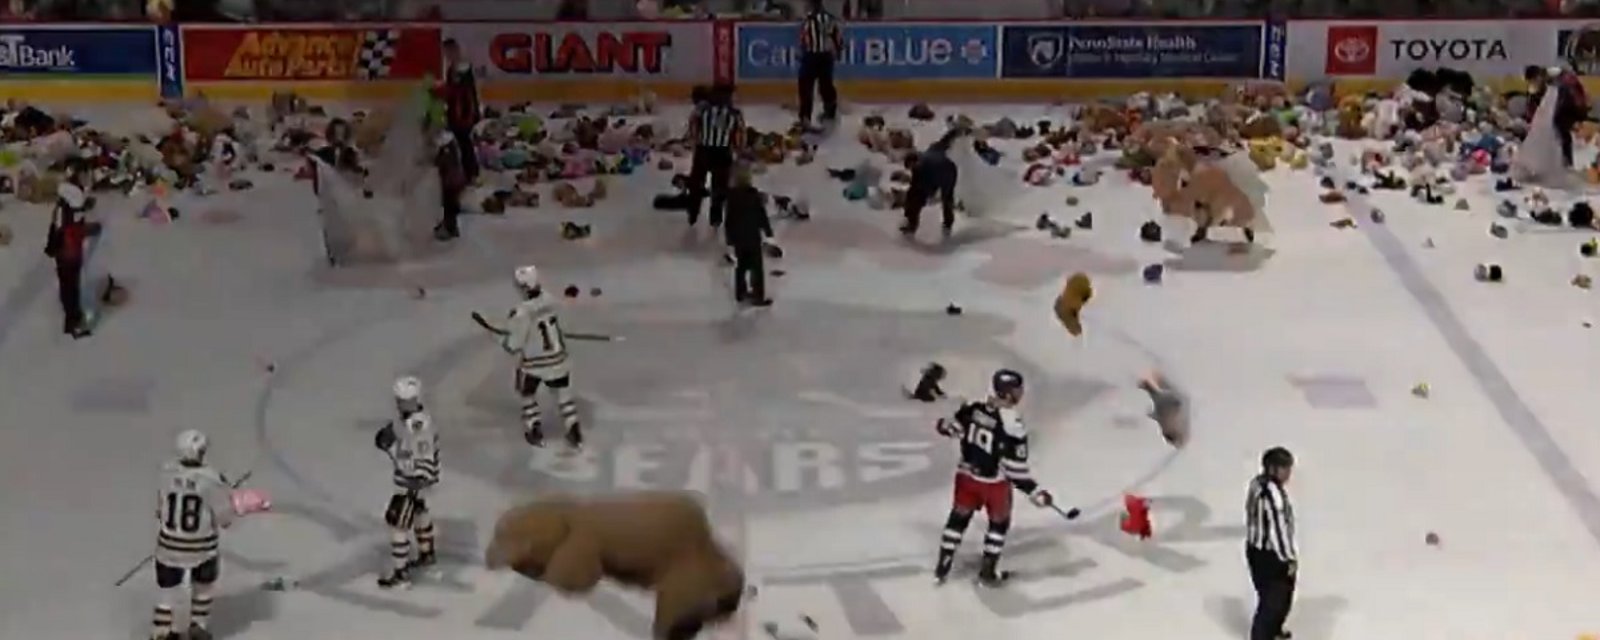 Hockey fans cover the ice with bears in annual Teddy Bear Toss.